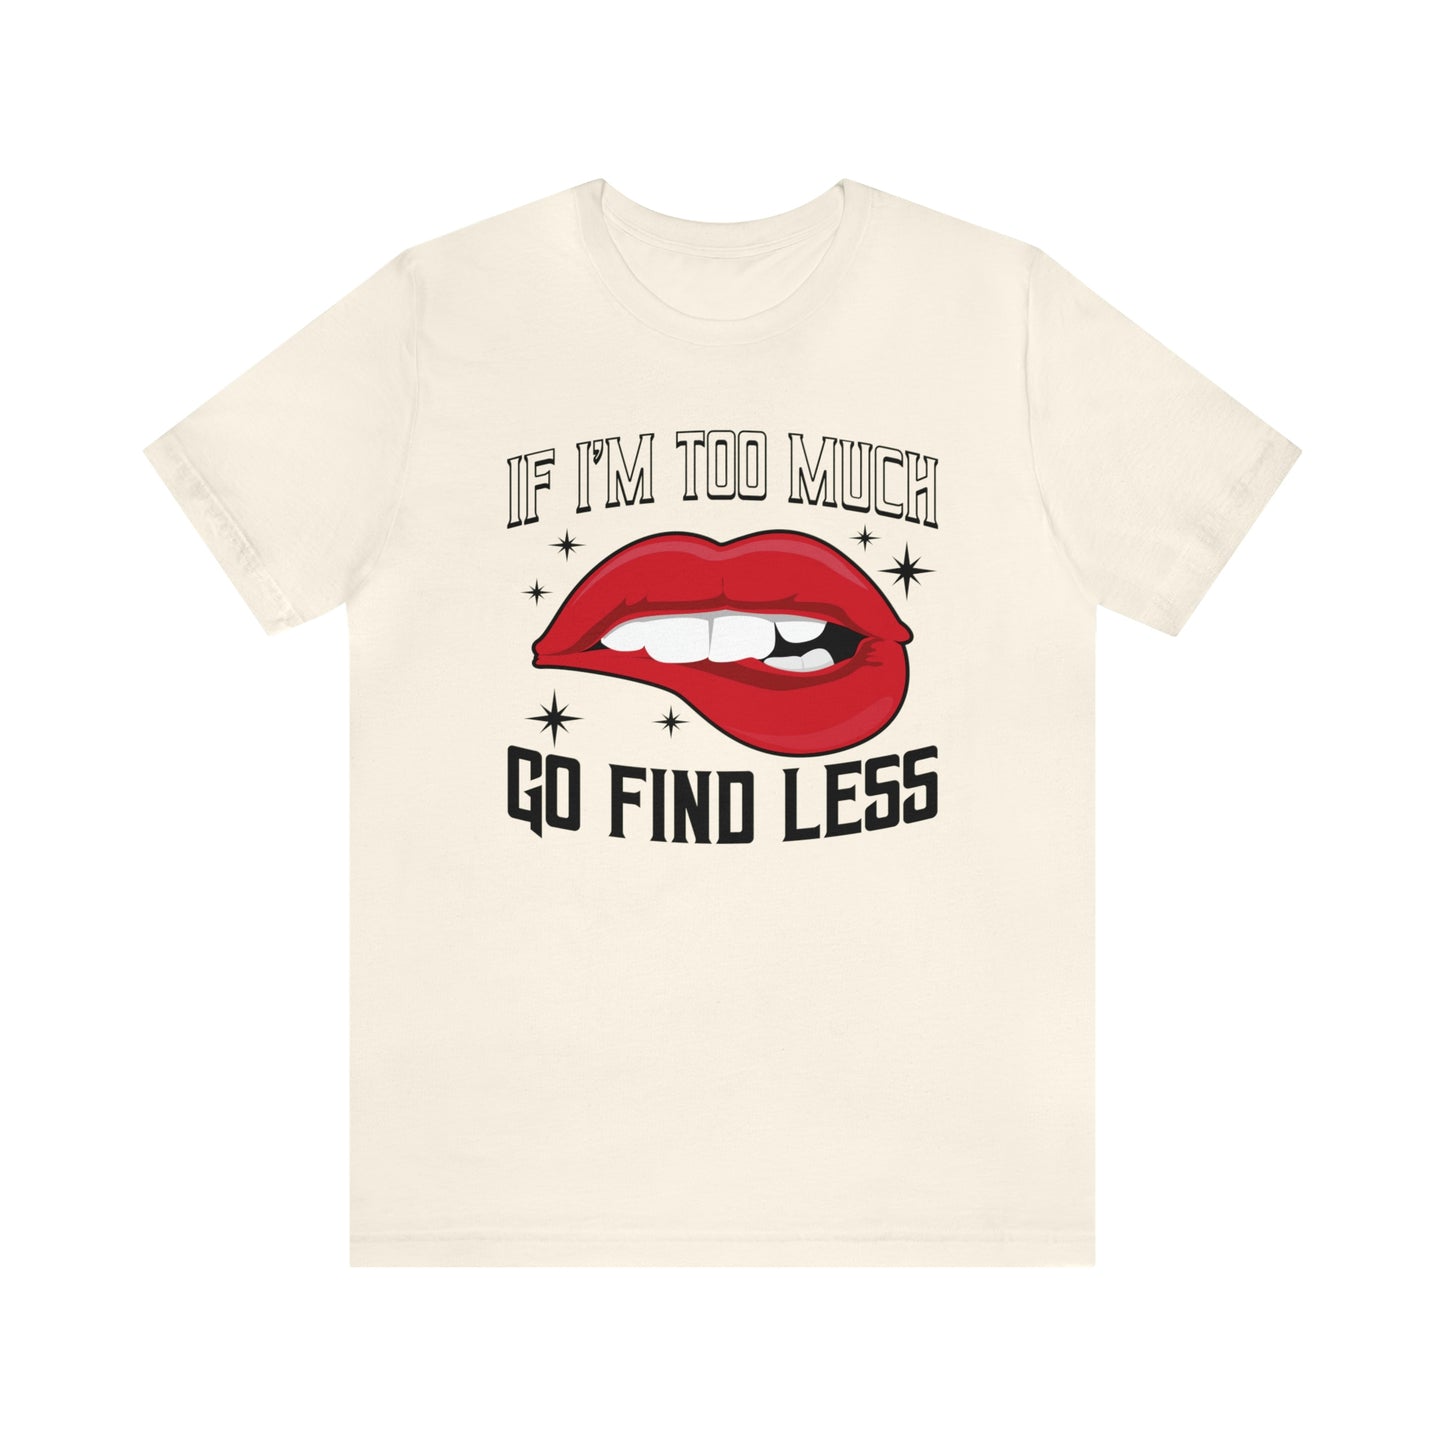 If I'm Too Much Then Go Find Less Women's T-Shirt T Shirt Custom Graphic Tee Unisex Girl Power Sarcasm Feminist Humor Funny Short Sleeve